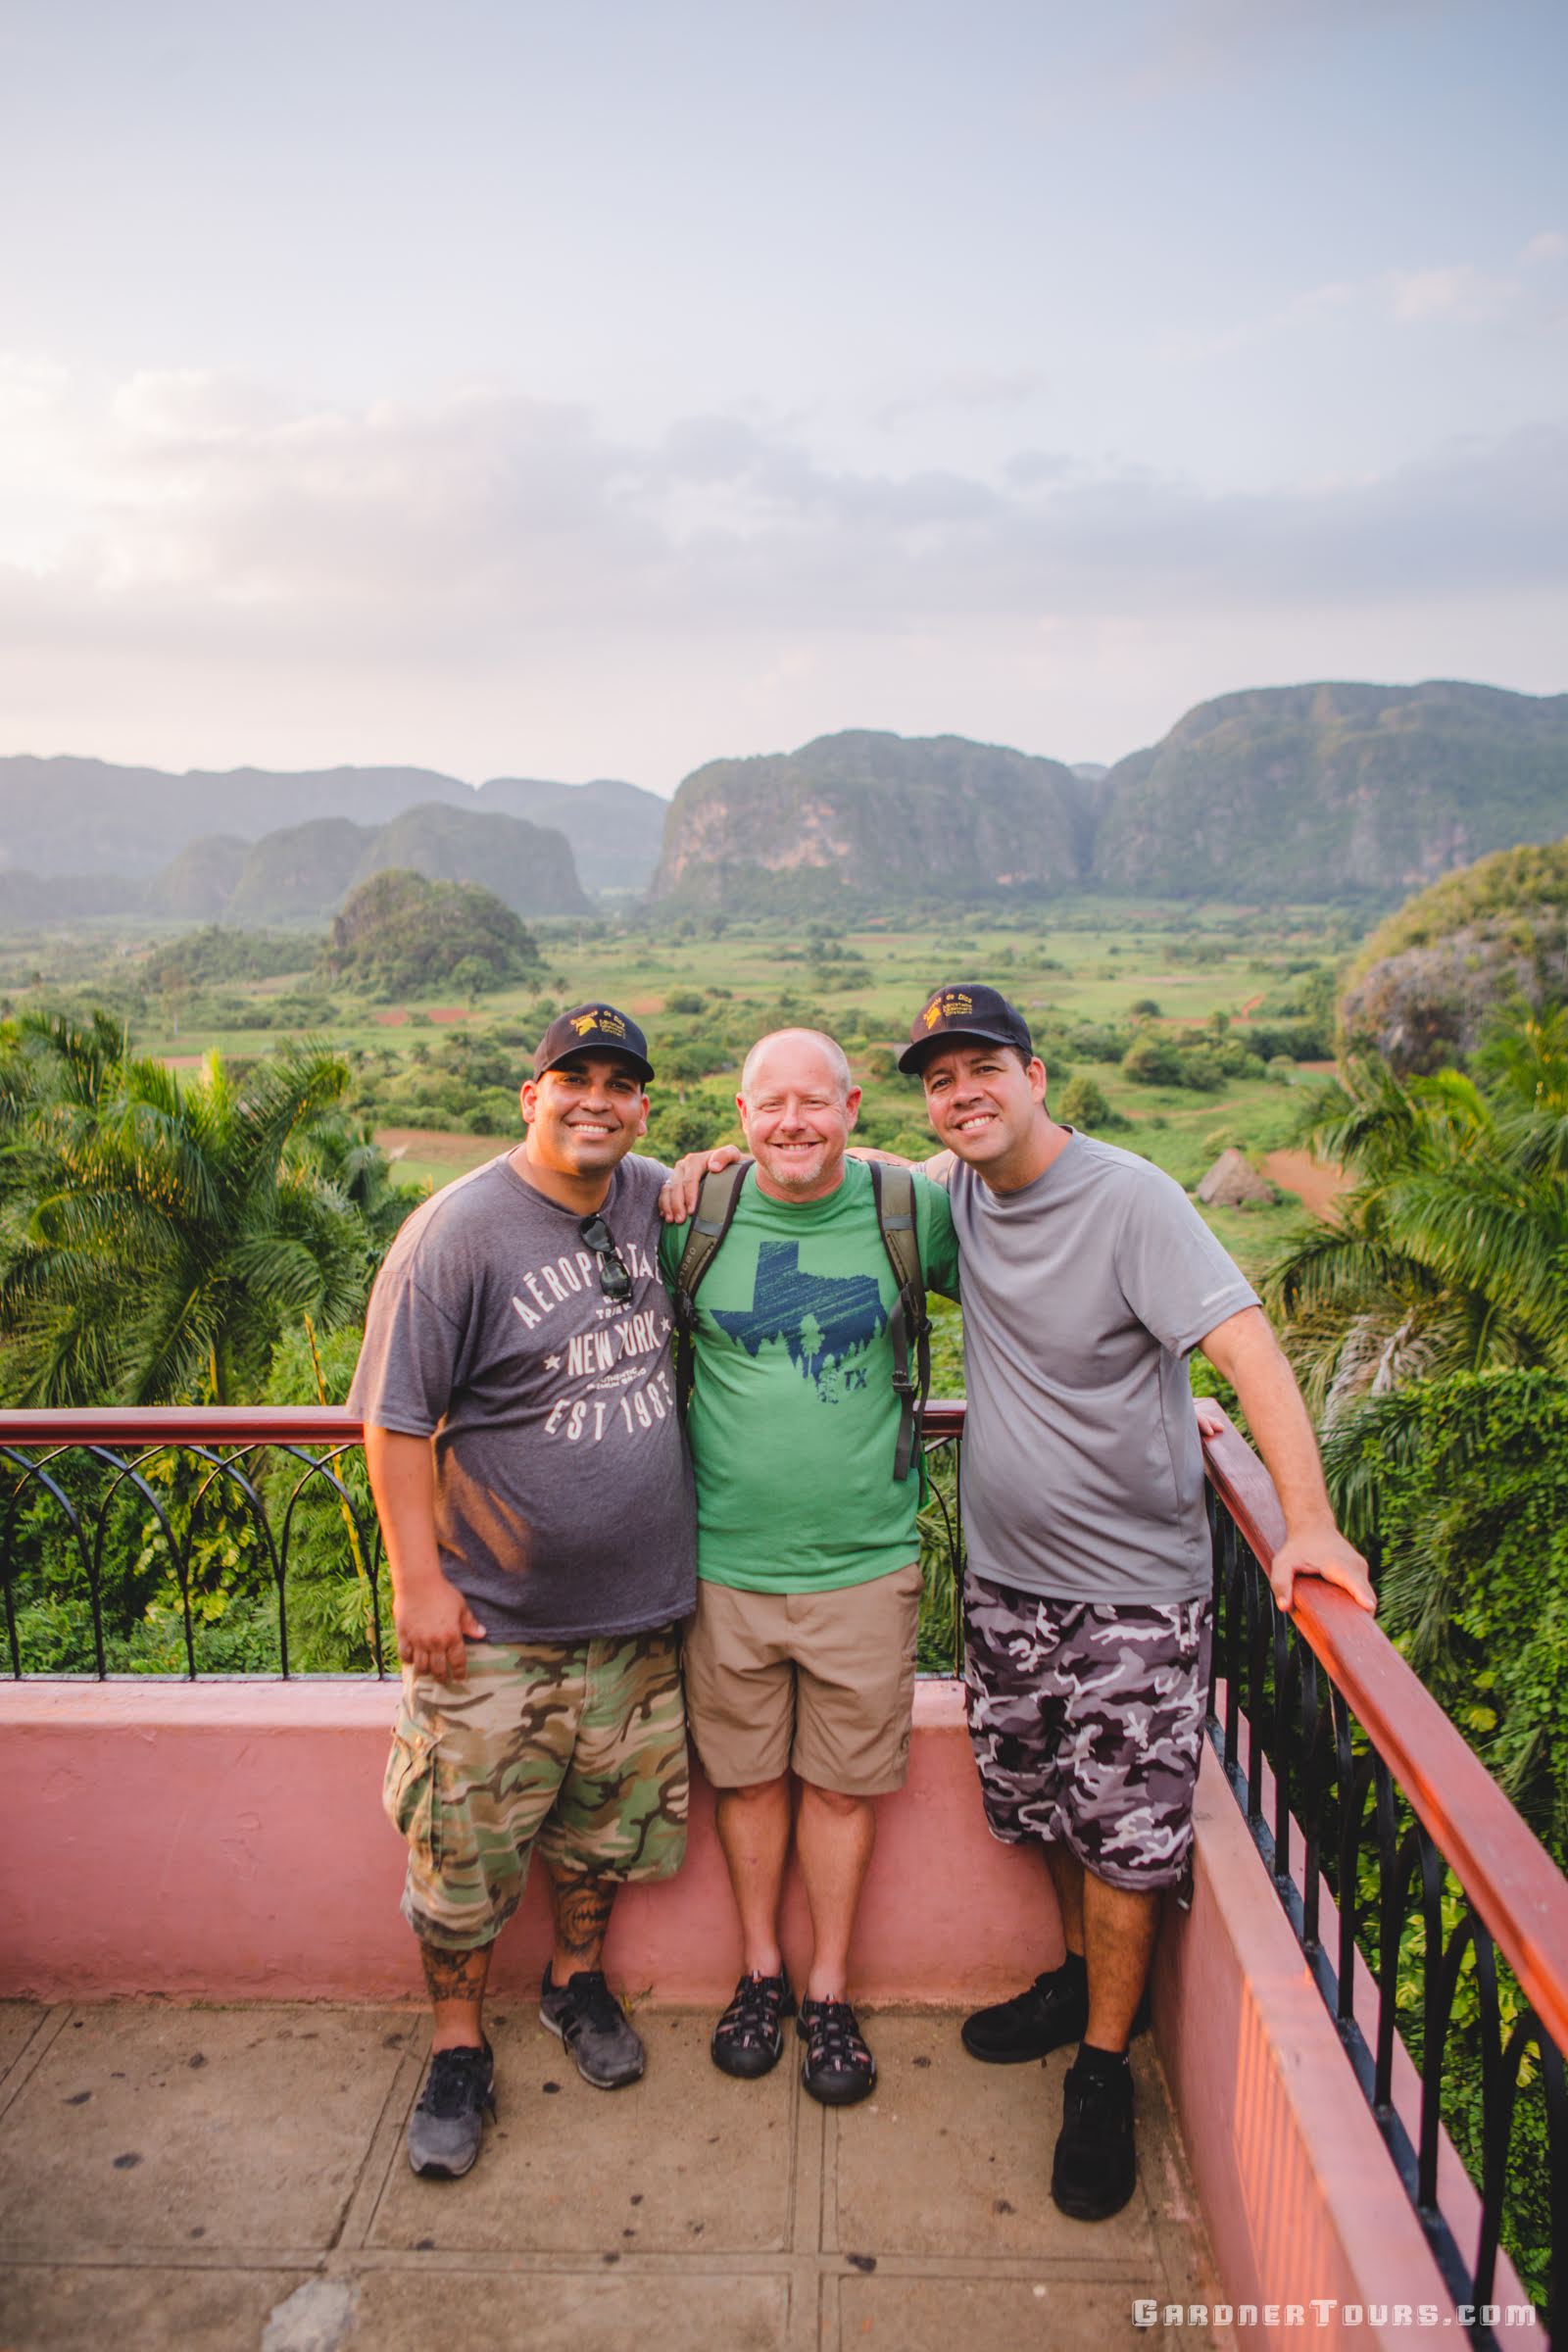 Gardner Tours Cuban Tour Guide Yunior and Albert smiling with a friend at the Viewpoint overlooking Viñales Valley in Cuba